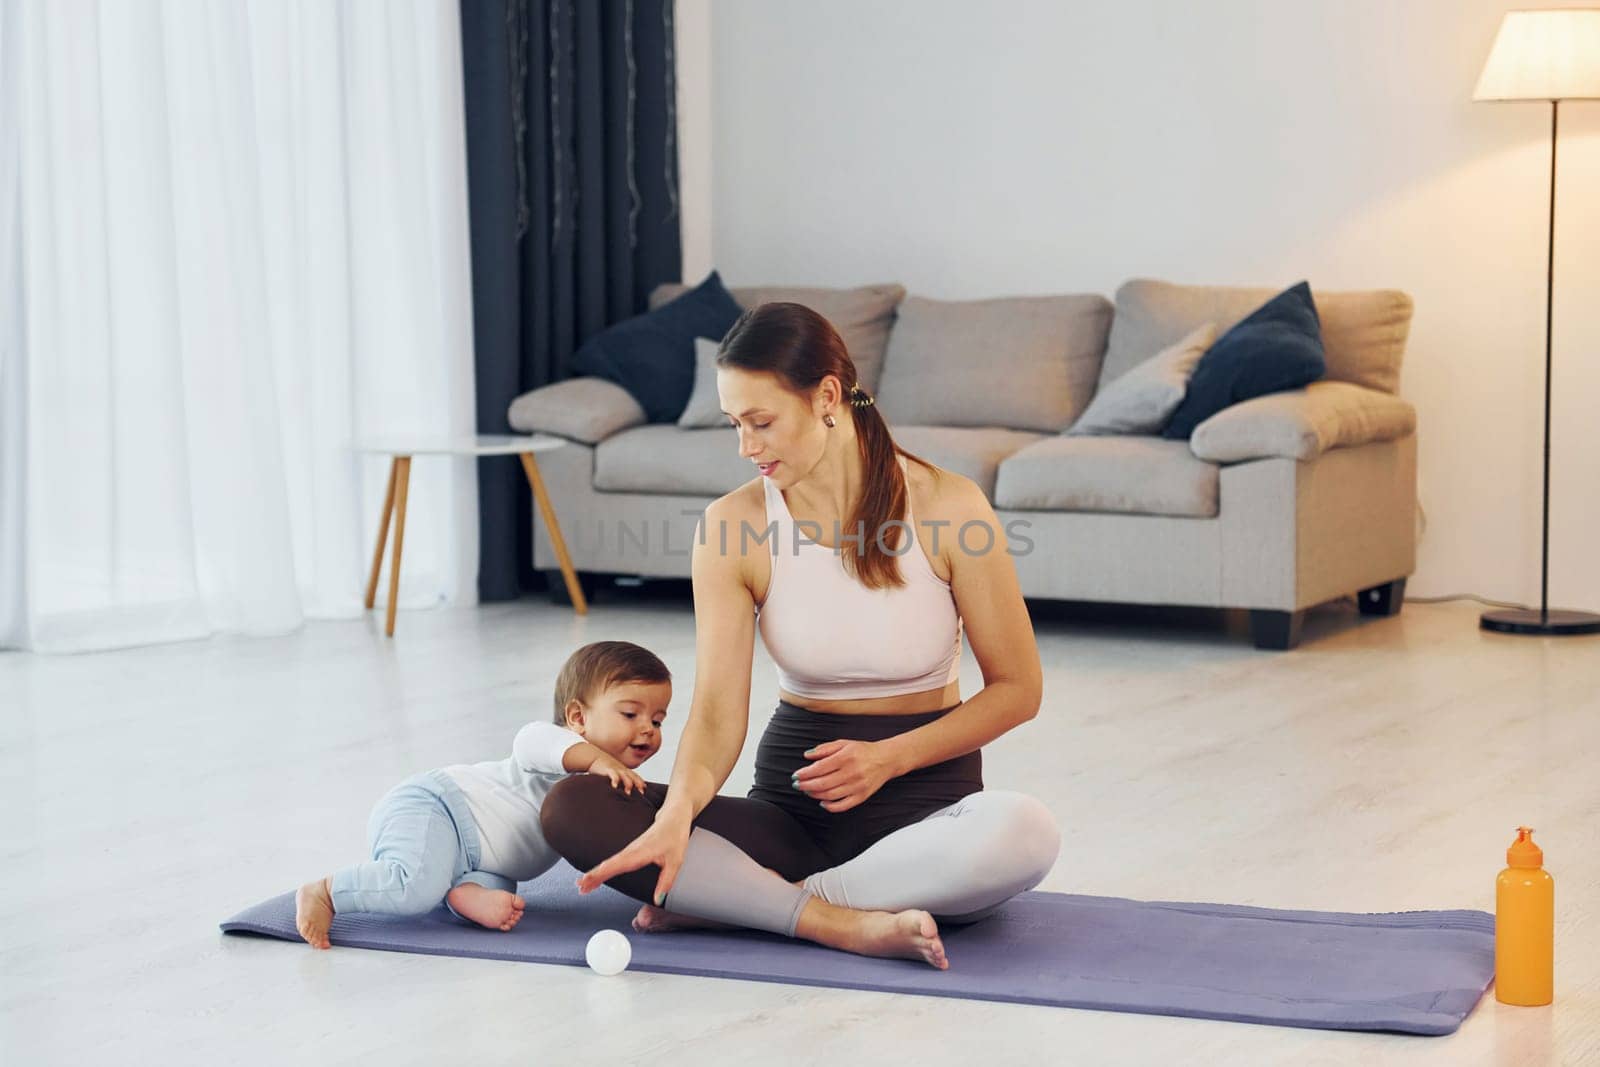 Doing exercises on the mat. Mother with her little daughter is at home together by Standret